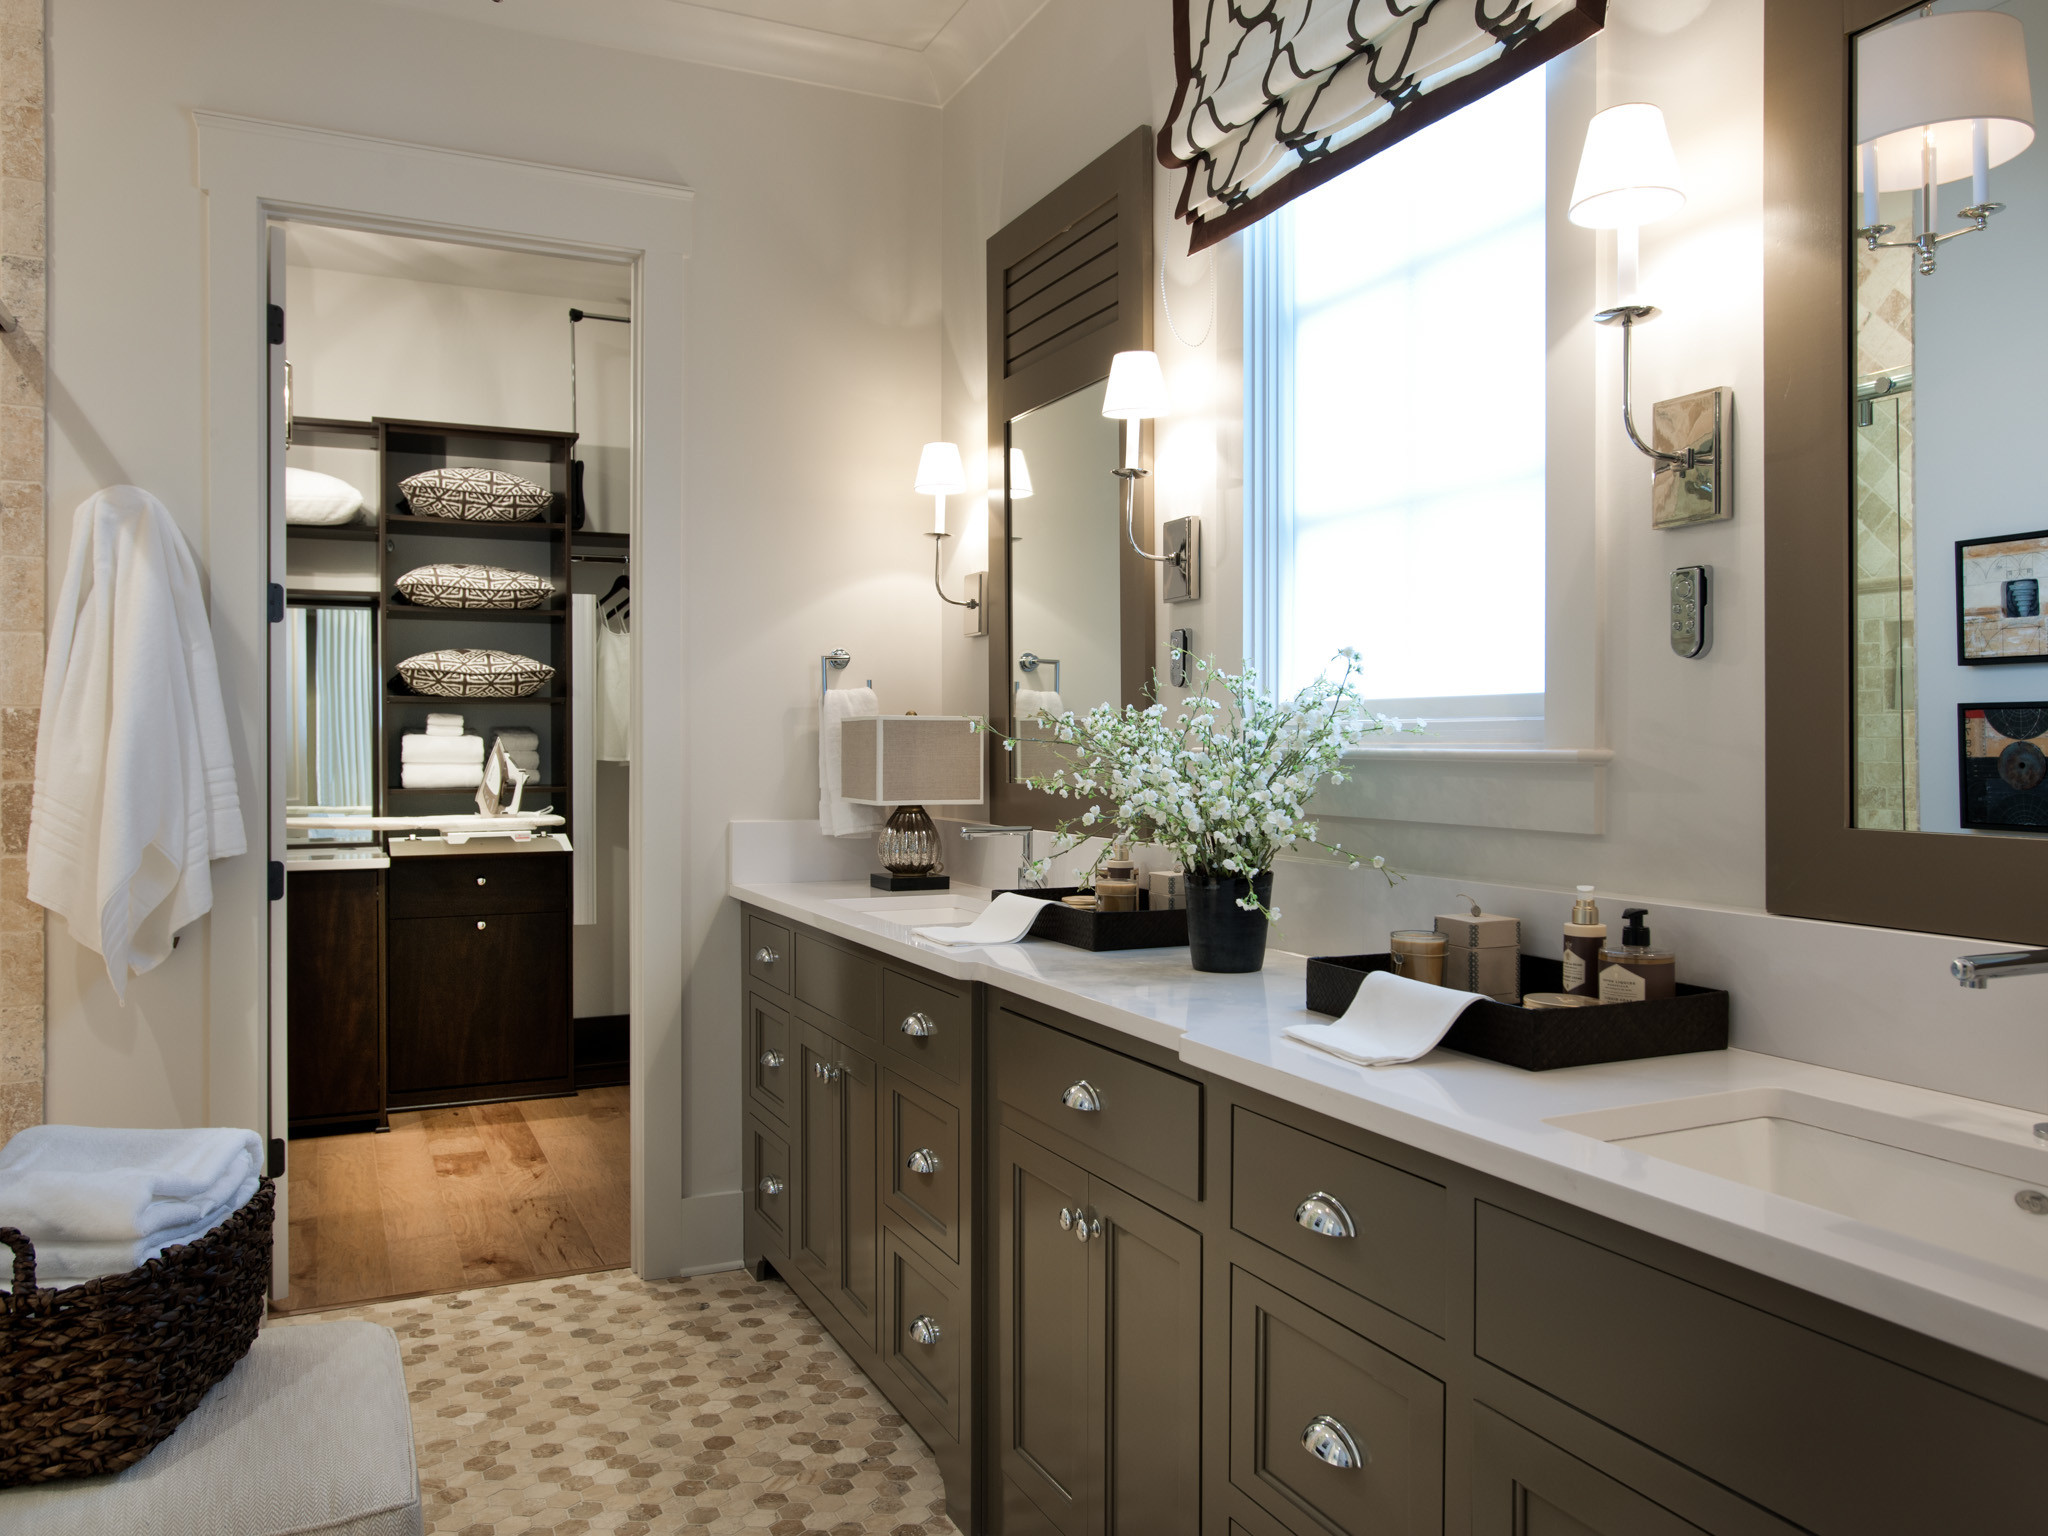 Master Bathroom Layouts
 How to Improve Master Bathroom Designs in Better Way